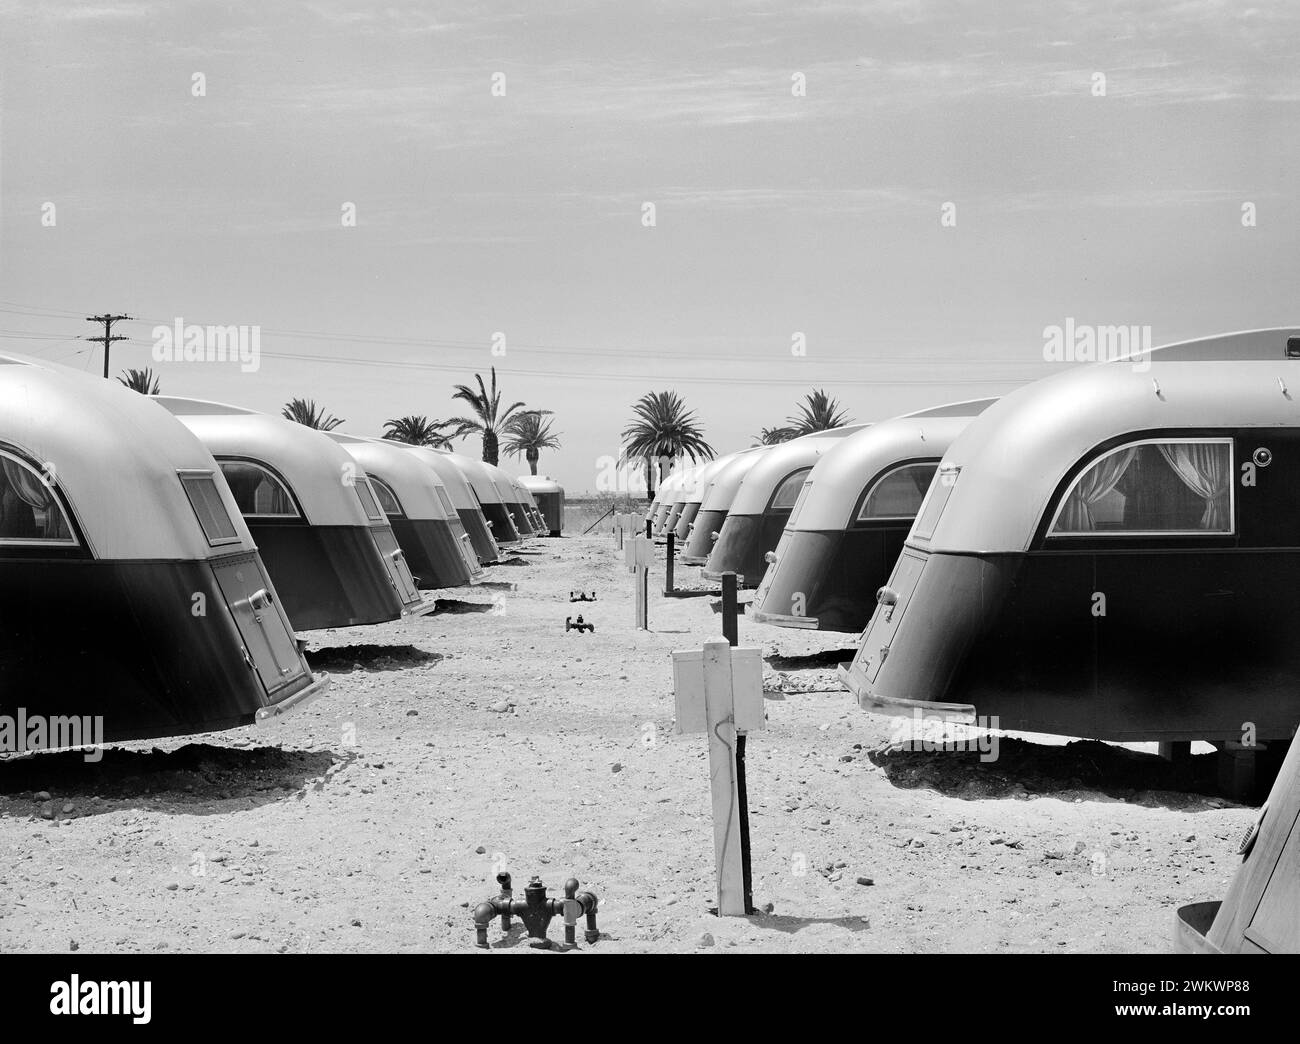 Line-up of trailers at the FSA (Farm Security Administration) camp for defense workers, San Diego, California, USA, Russell Lee, U.S. Farm Security Administration, June 1941 Stock Photo